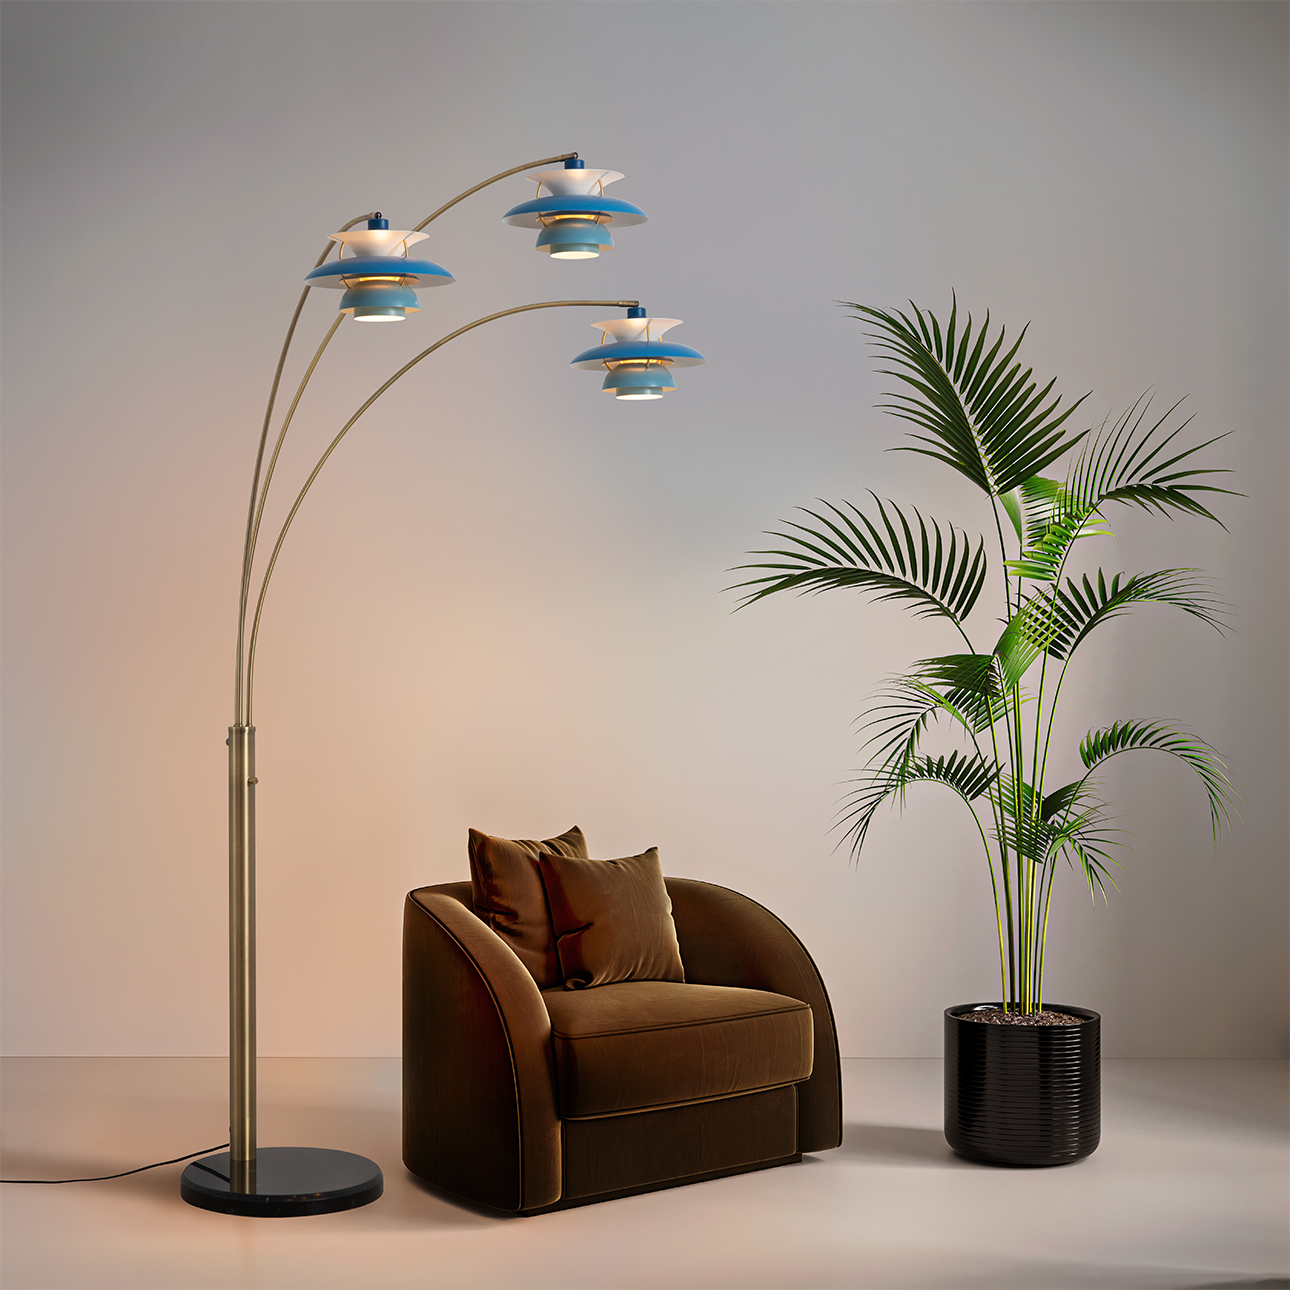 Palm Springs 84″ 3 Light Arc Lamp in Weathered Brass and Bluetone Shades with Dimmer Switch